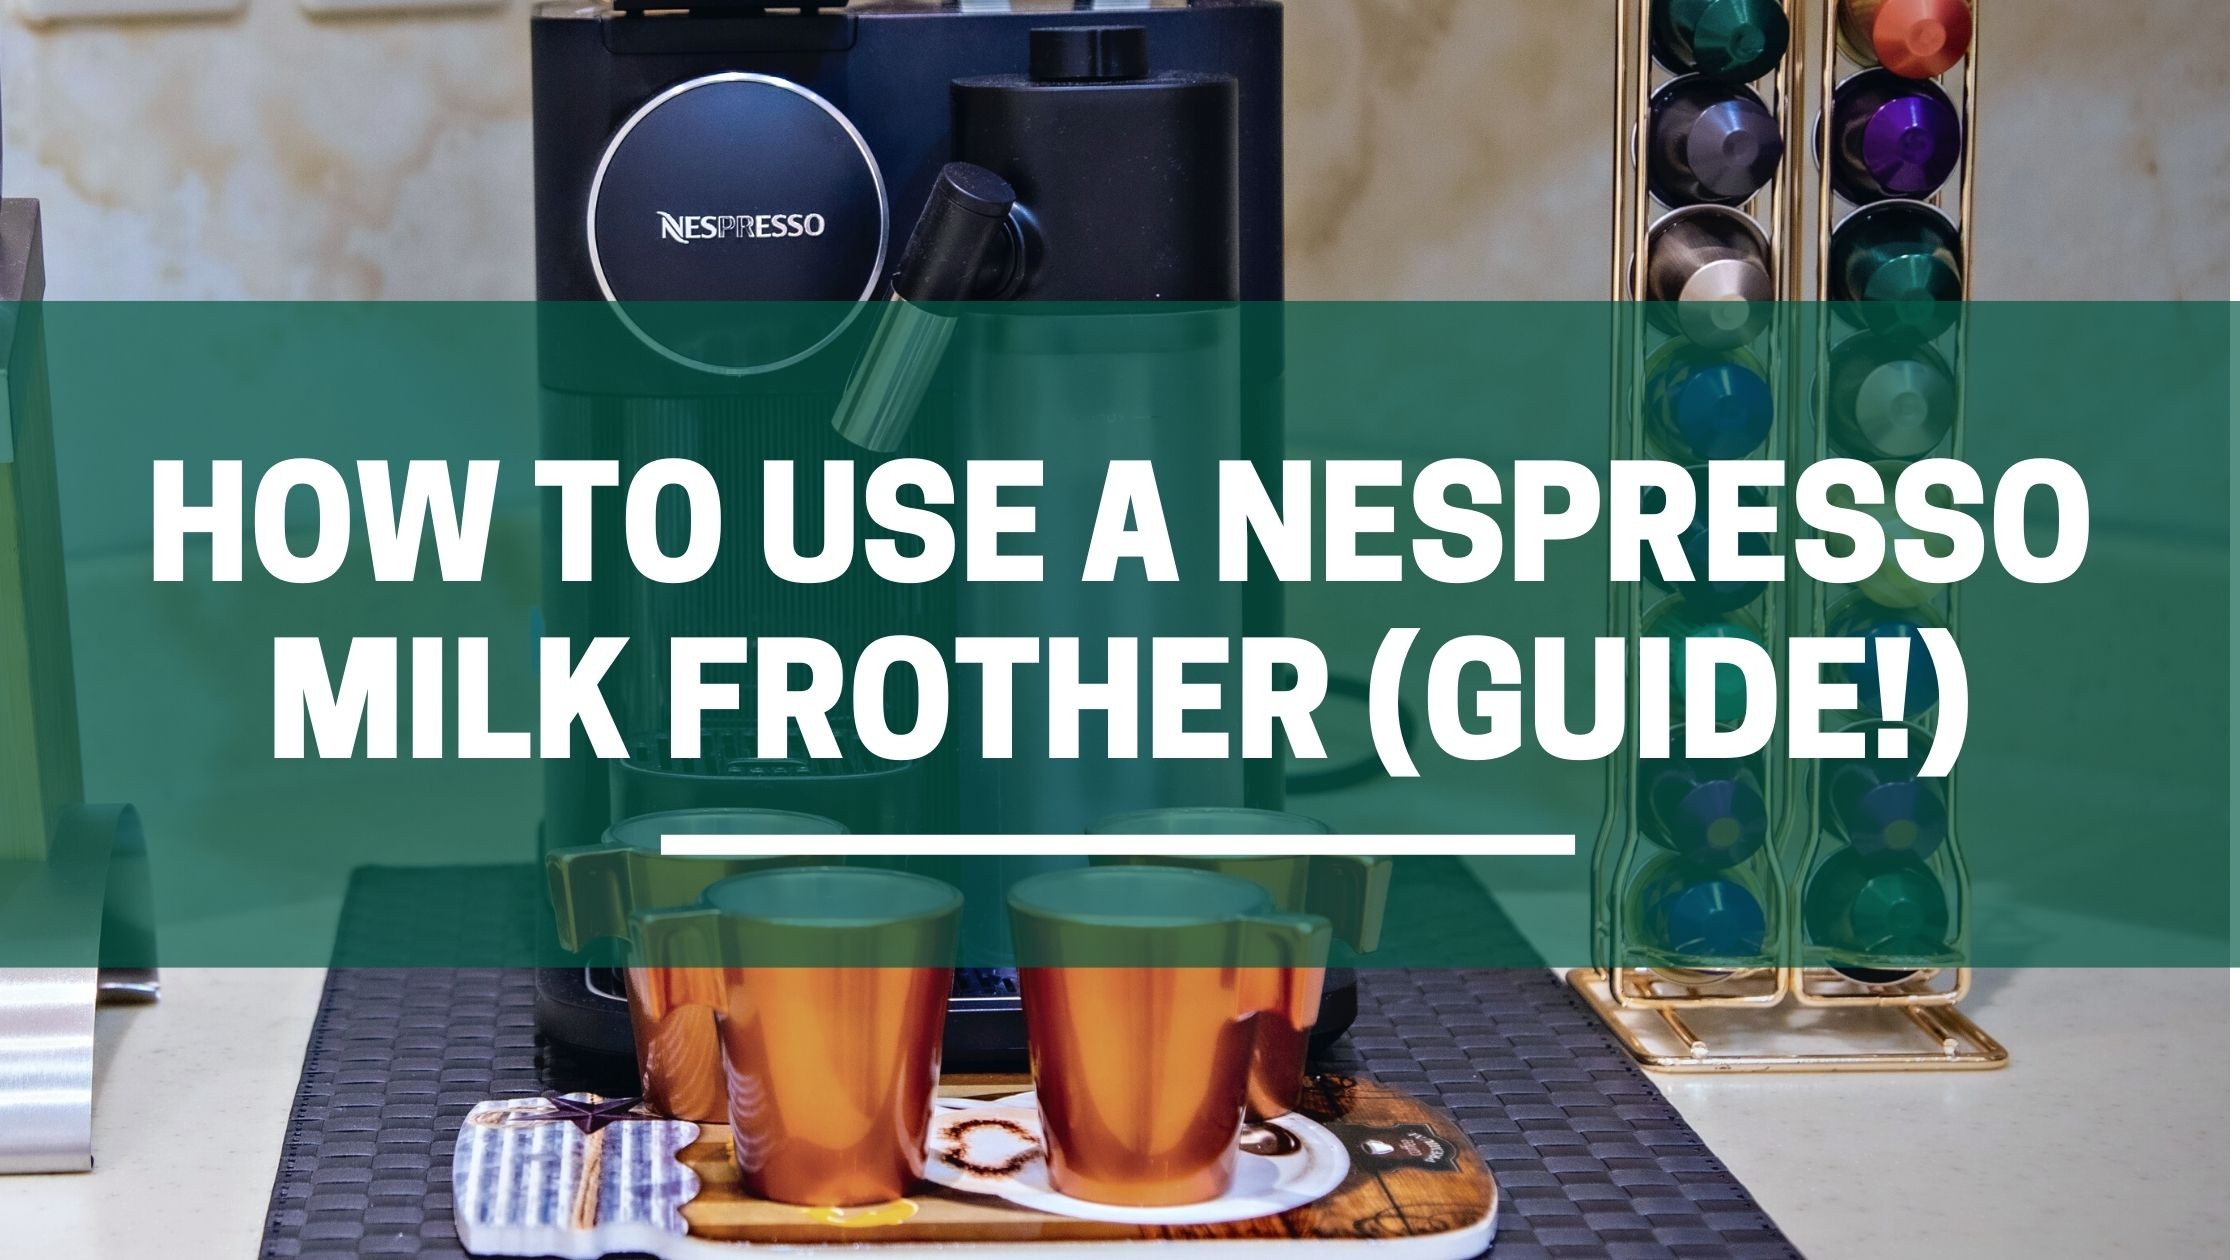 How To Nespresso Milk Frother (Do This!) – The Green Pods